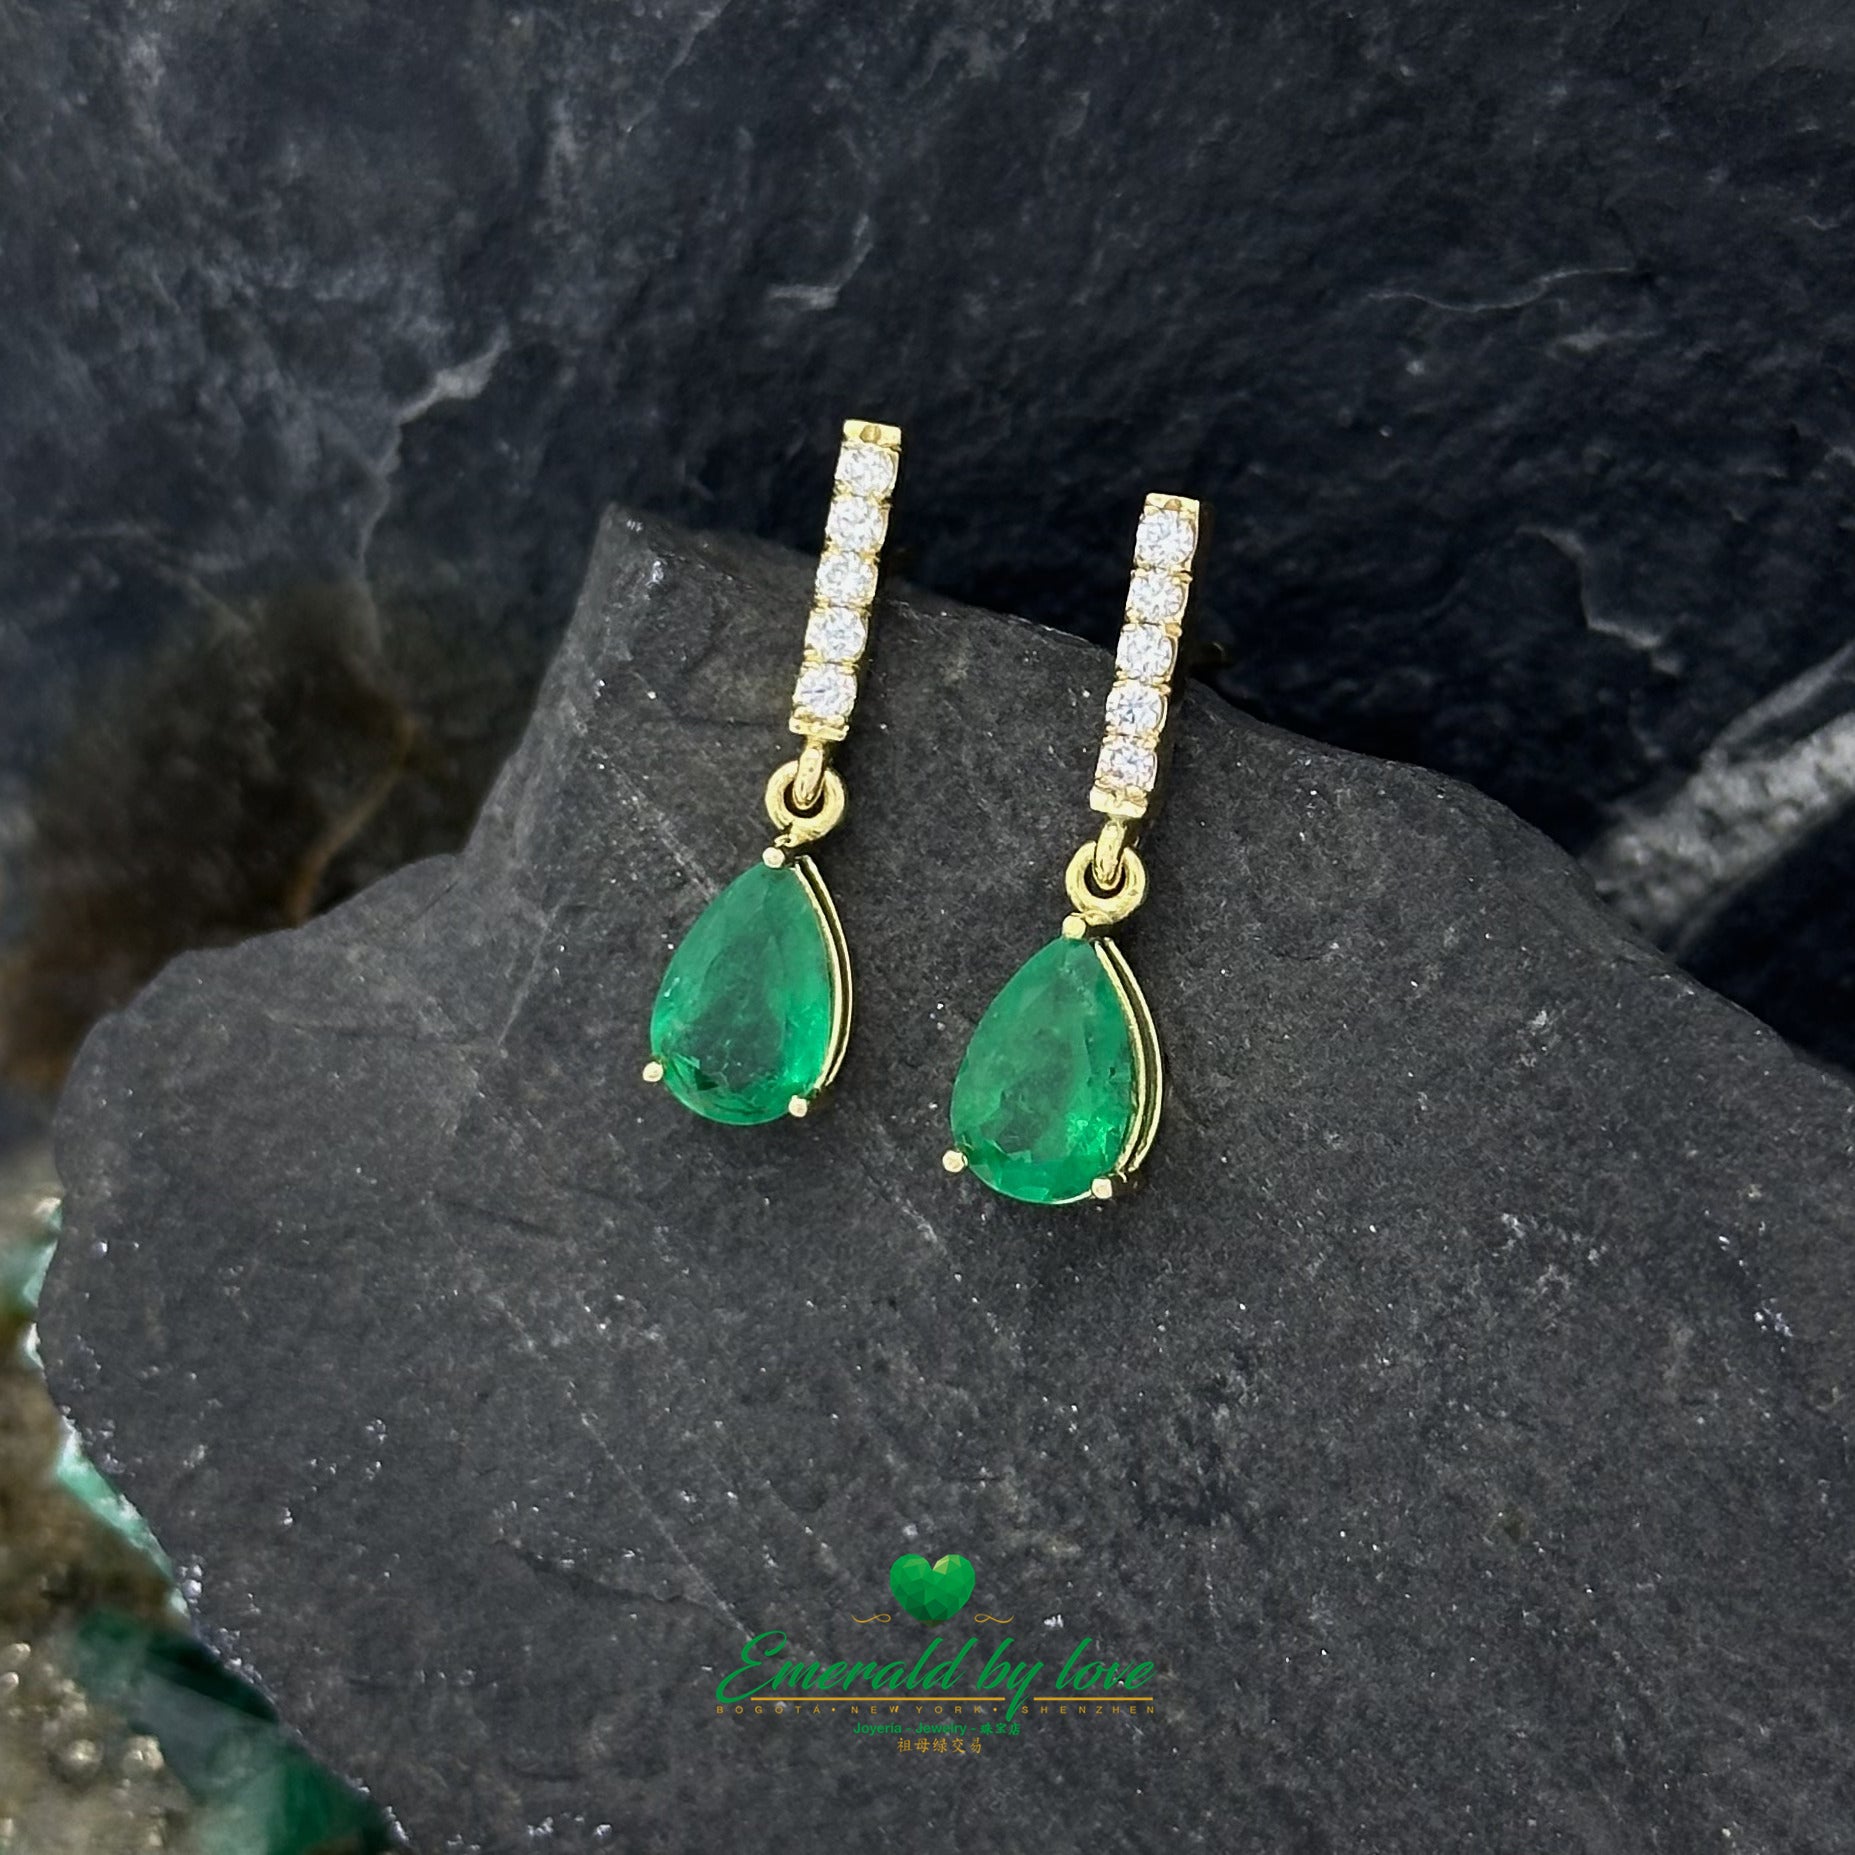 Elongated Yellow Gold Earrings Adorned with Diamond and Emerald Teardrop Accents